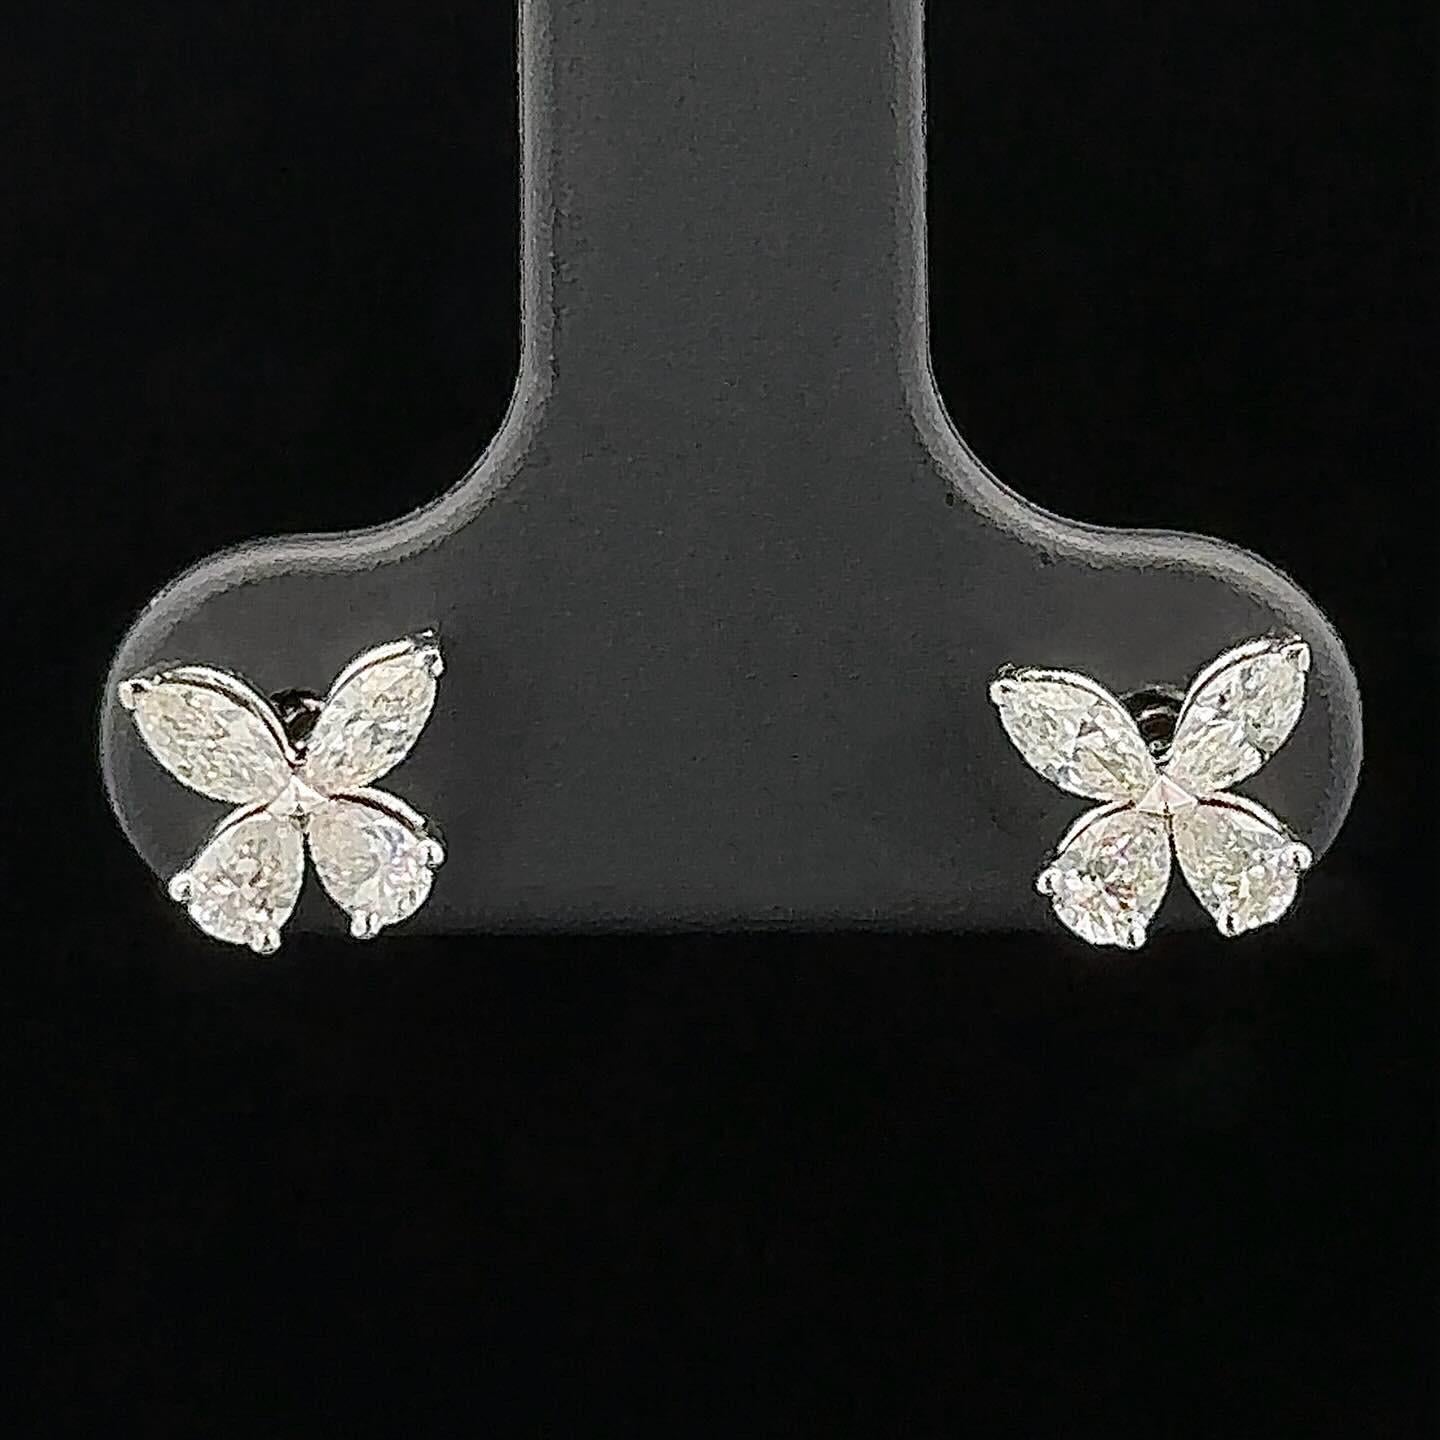 1.64 Carat Butterfly Natural Diamond Earrings in 18K White Gold - MADE TO ORDER

Delicately designed, each earring features a graceful butterfly motif adorned with dazzling natural diamonds that shimmer and dance with every movement. Set against the